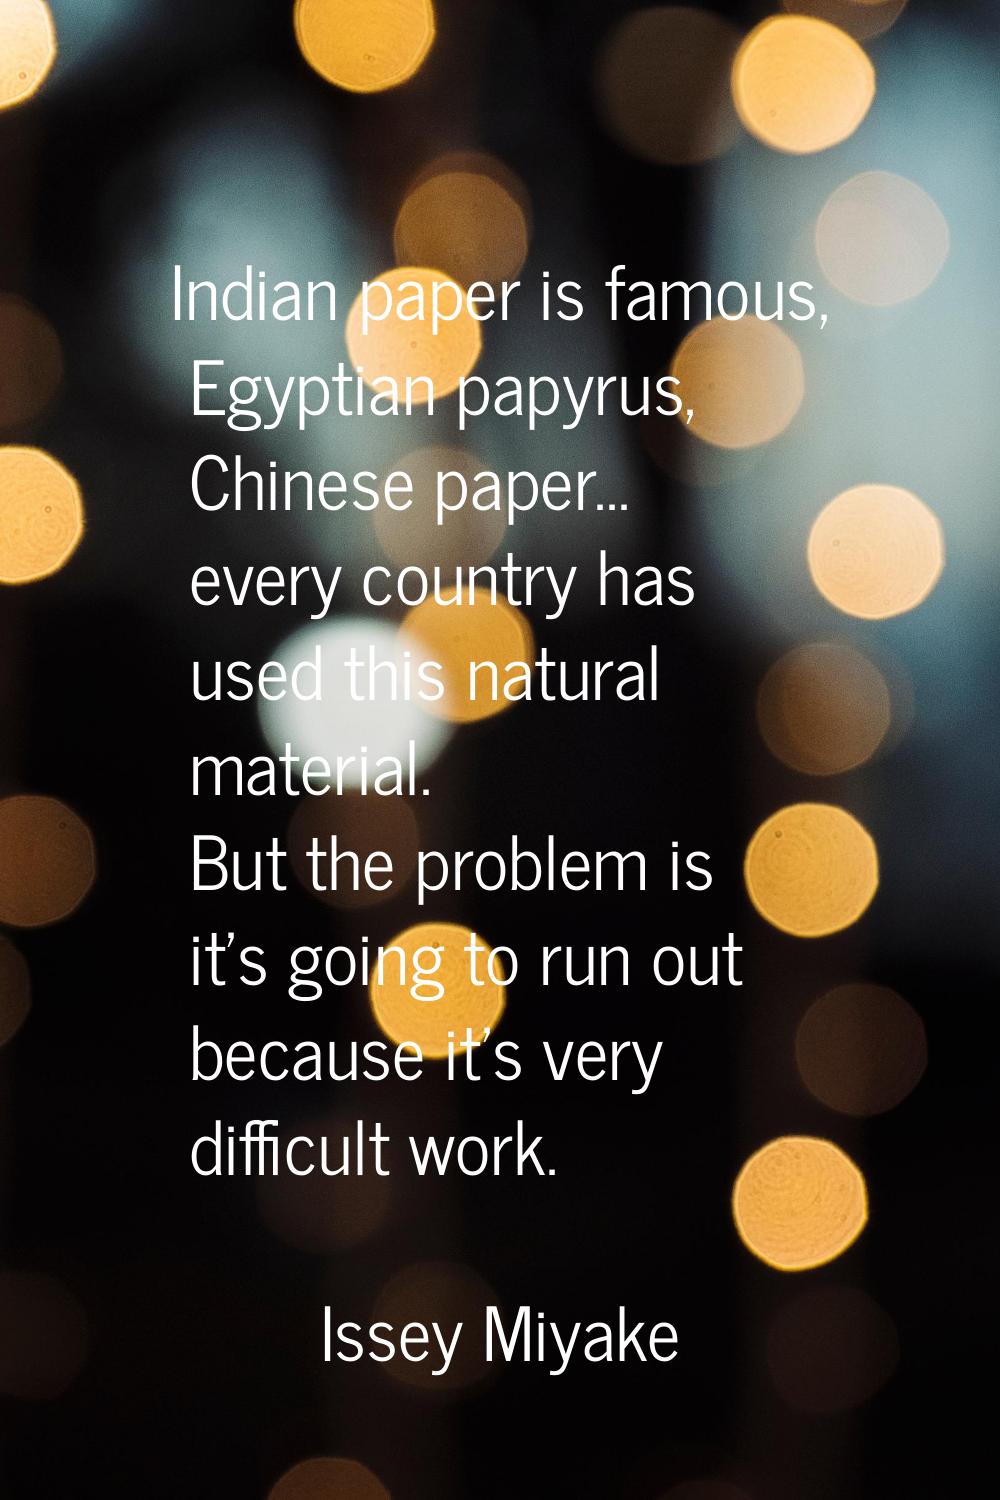 Indian paper is famous, Egyptian papyrus, Chinese paper... every country has used this natural mate